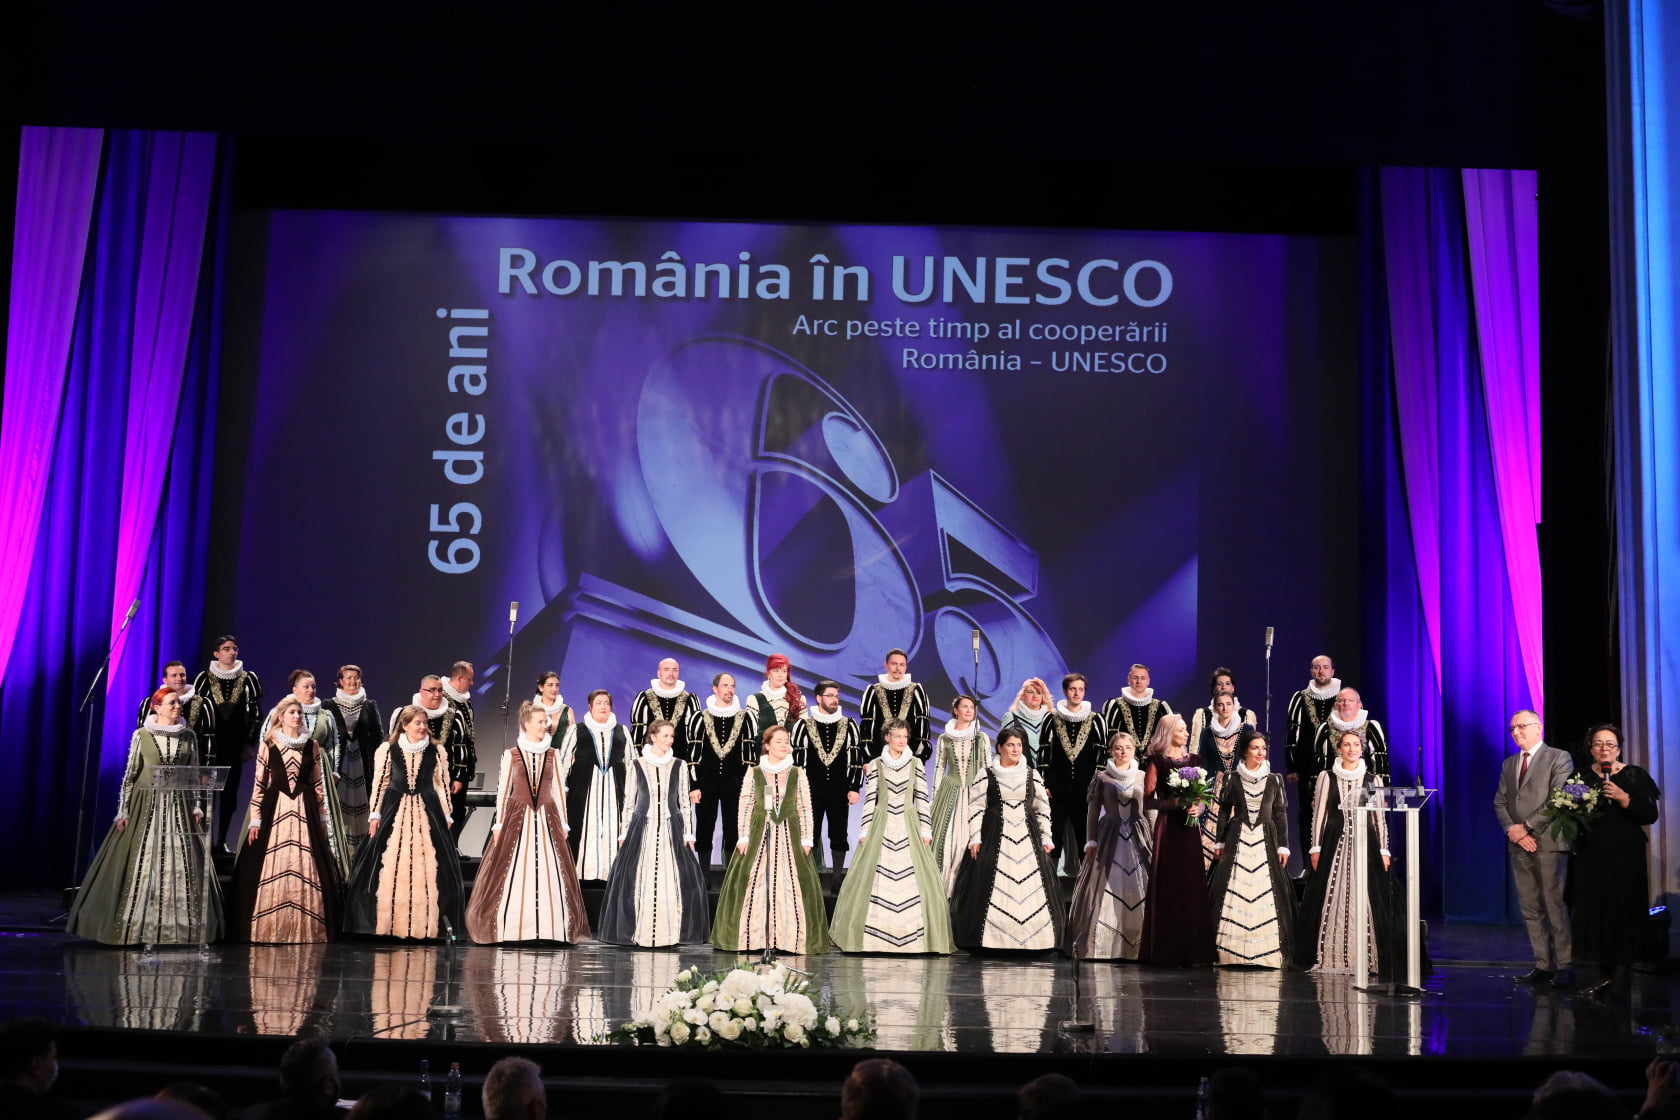 National Commission of Romania for UNESCO launches the series of events from the anniversary program occasioned by the celebration of 65 years of Romanian presence in UNESCO